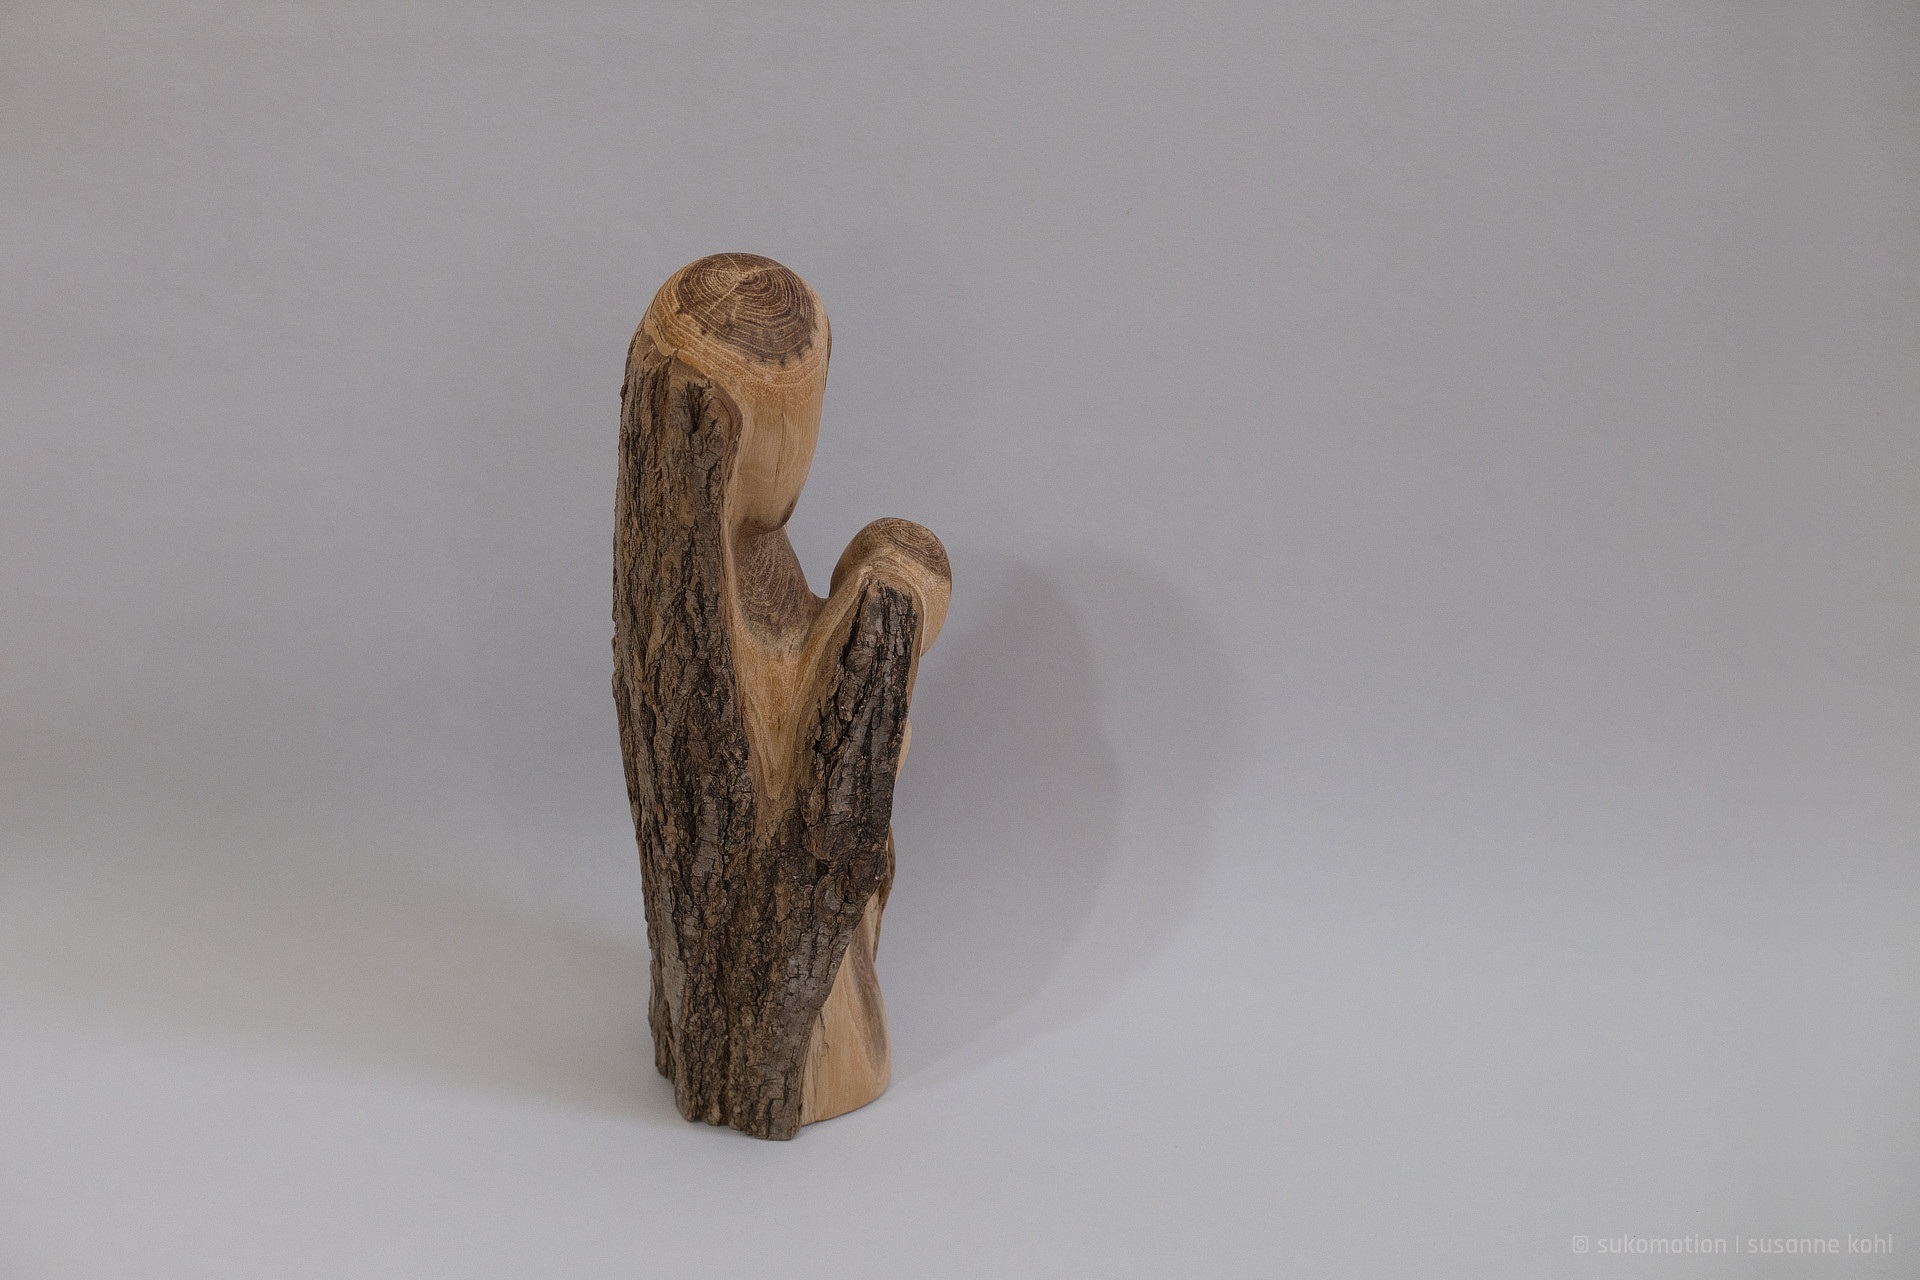 safe & curious - woodsculpture with bark  by sukomotion | susanne kohl - berlin